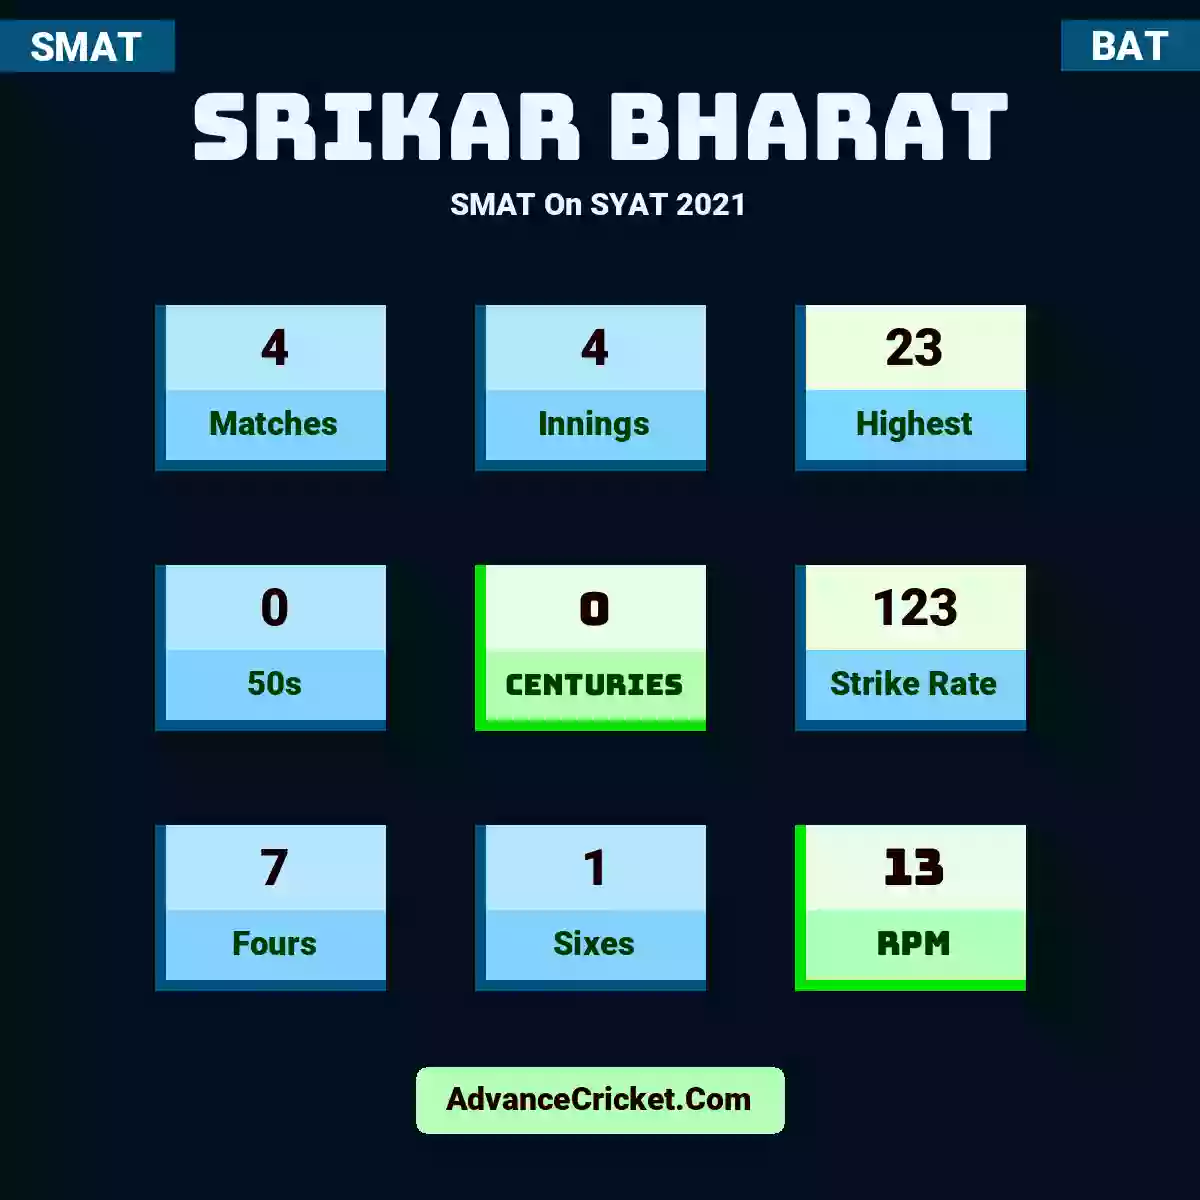 Srikar Bharat SMAT  On SYAT 2021, Srikar Bharat played 4 matches, scored 23 runs as highest, 0 half-centuries, and 0 centuries, with a strike rate of 123. S.Bharat hit 7 fours and 1 sixes, with an RPM of 13.